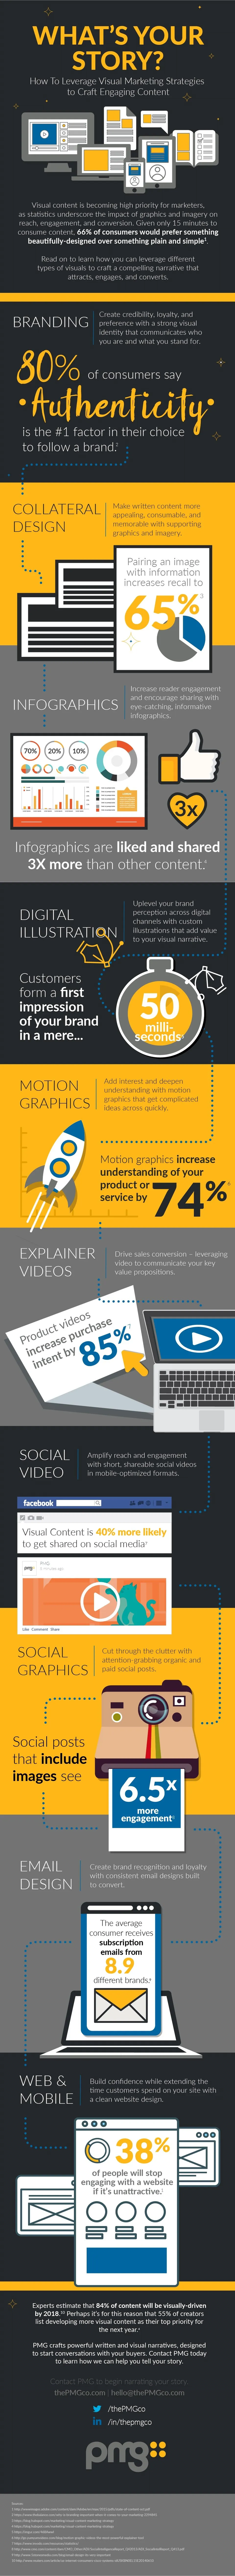 How To Leverage Visual Marketing Strategies to Craft Engaging Content - #infographic